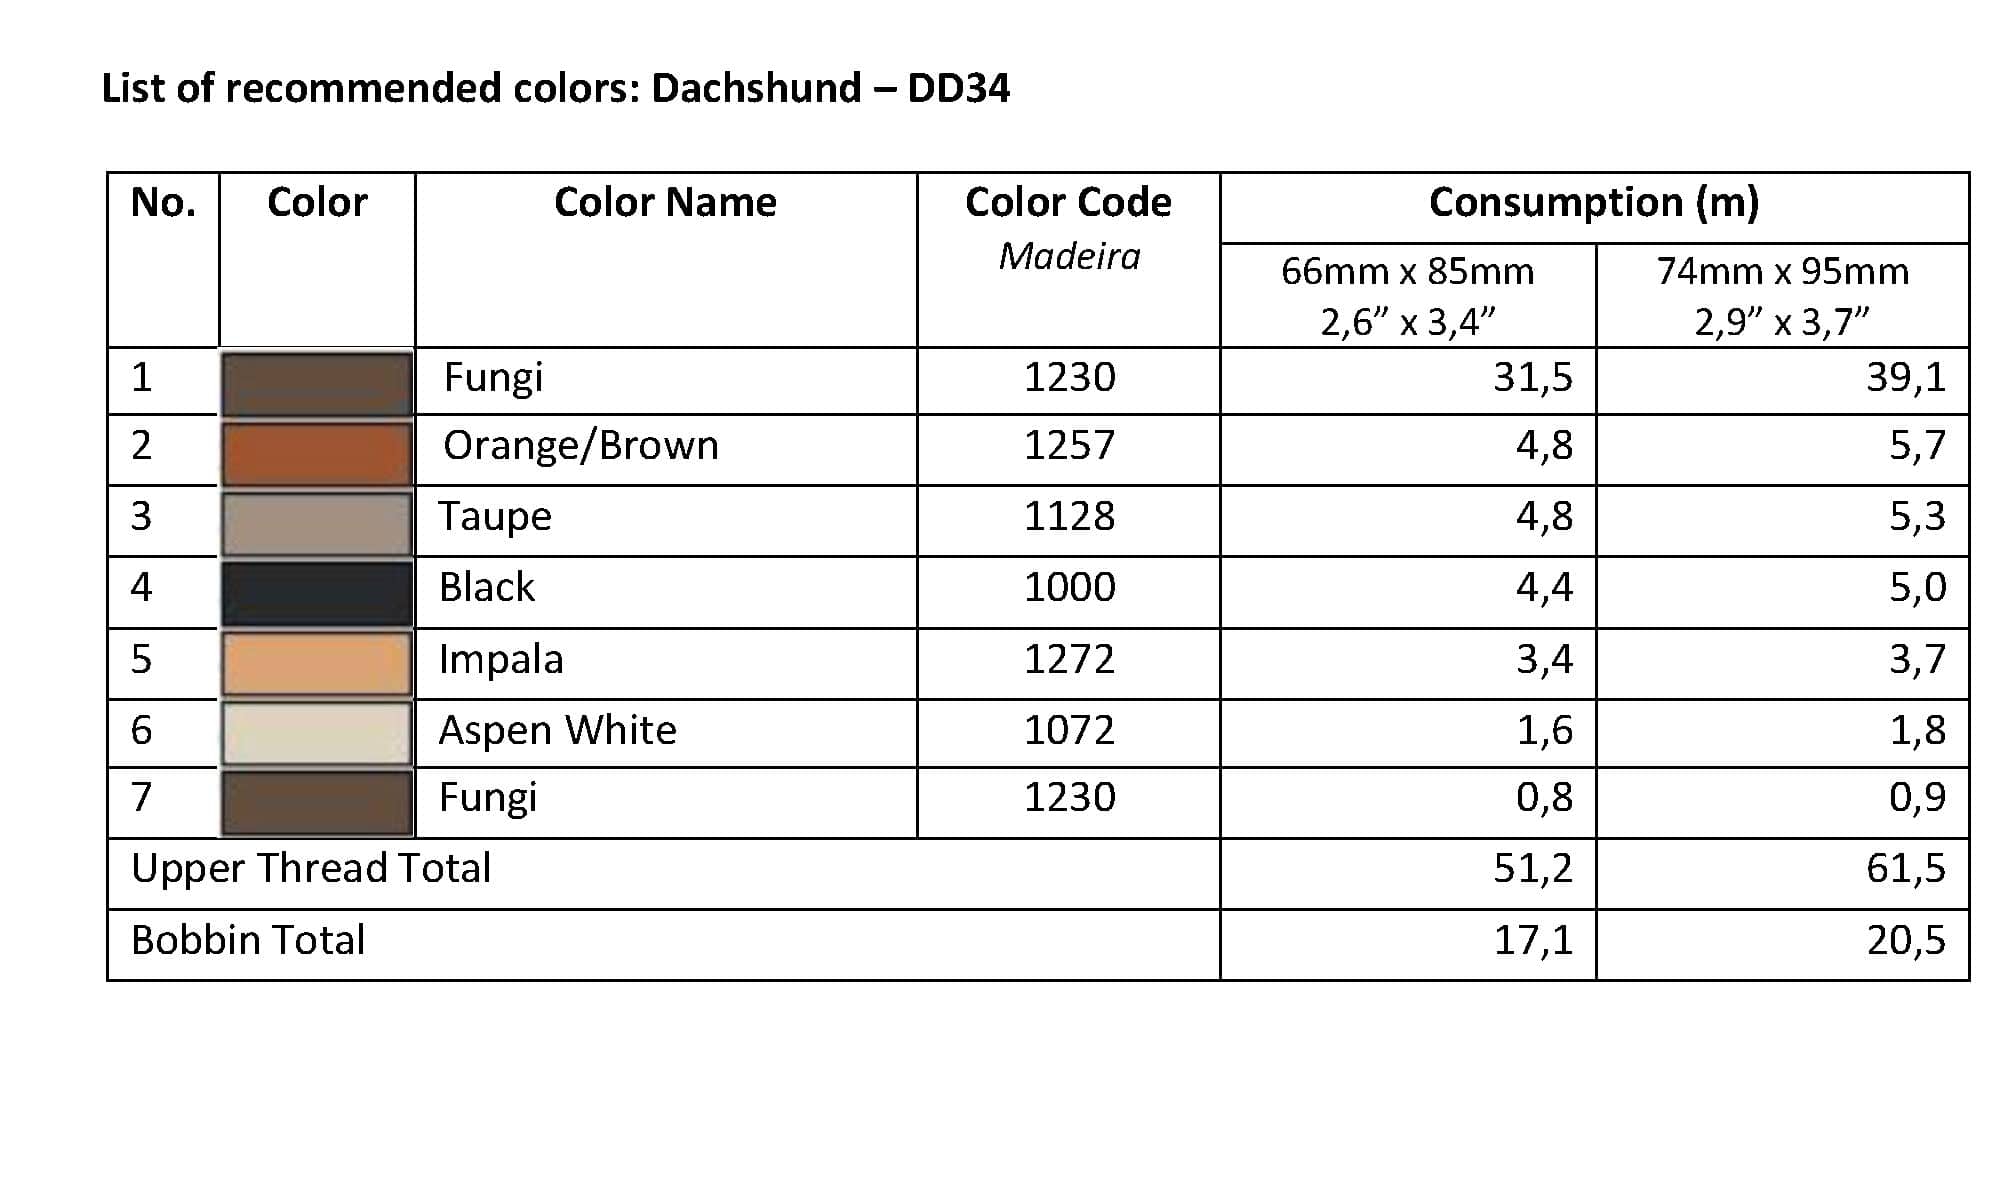 List of Recommended Colors - Dachshund DD34